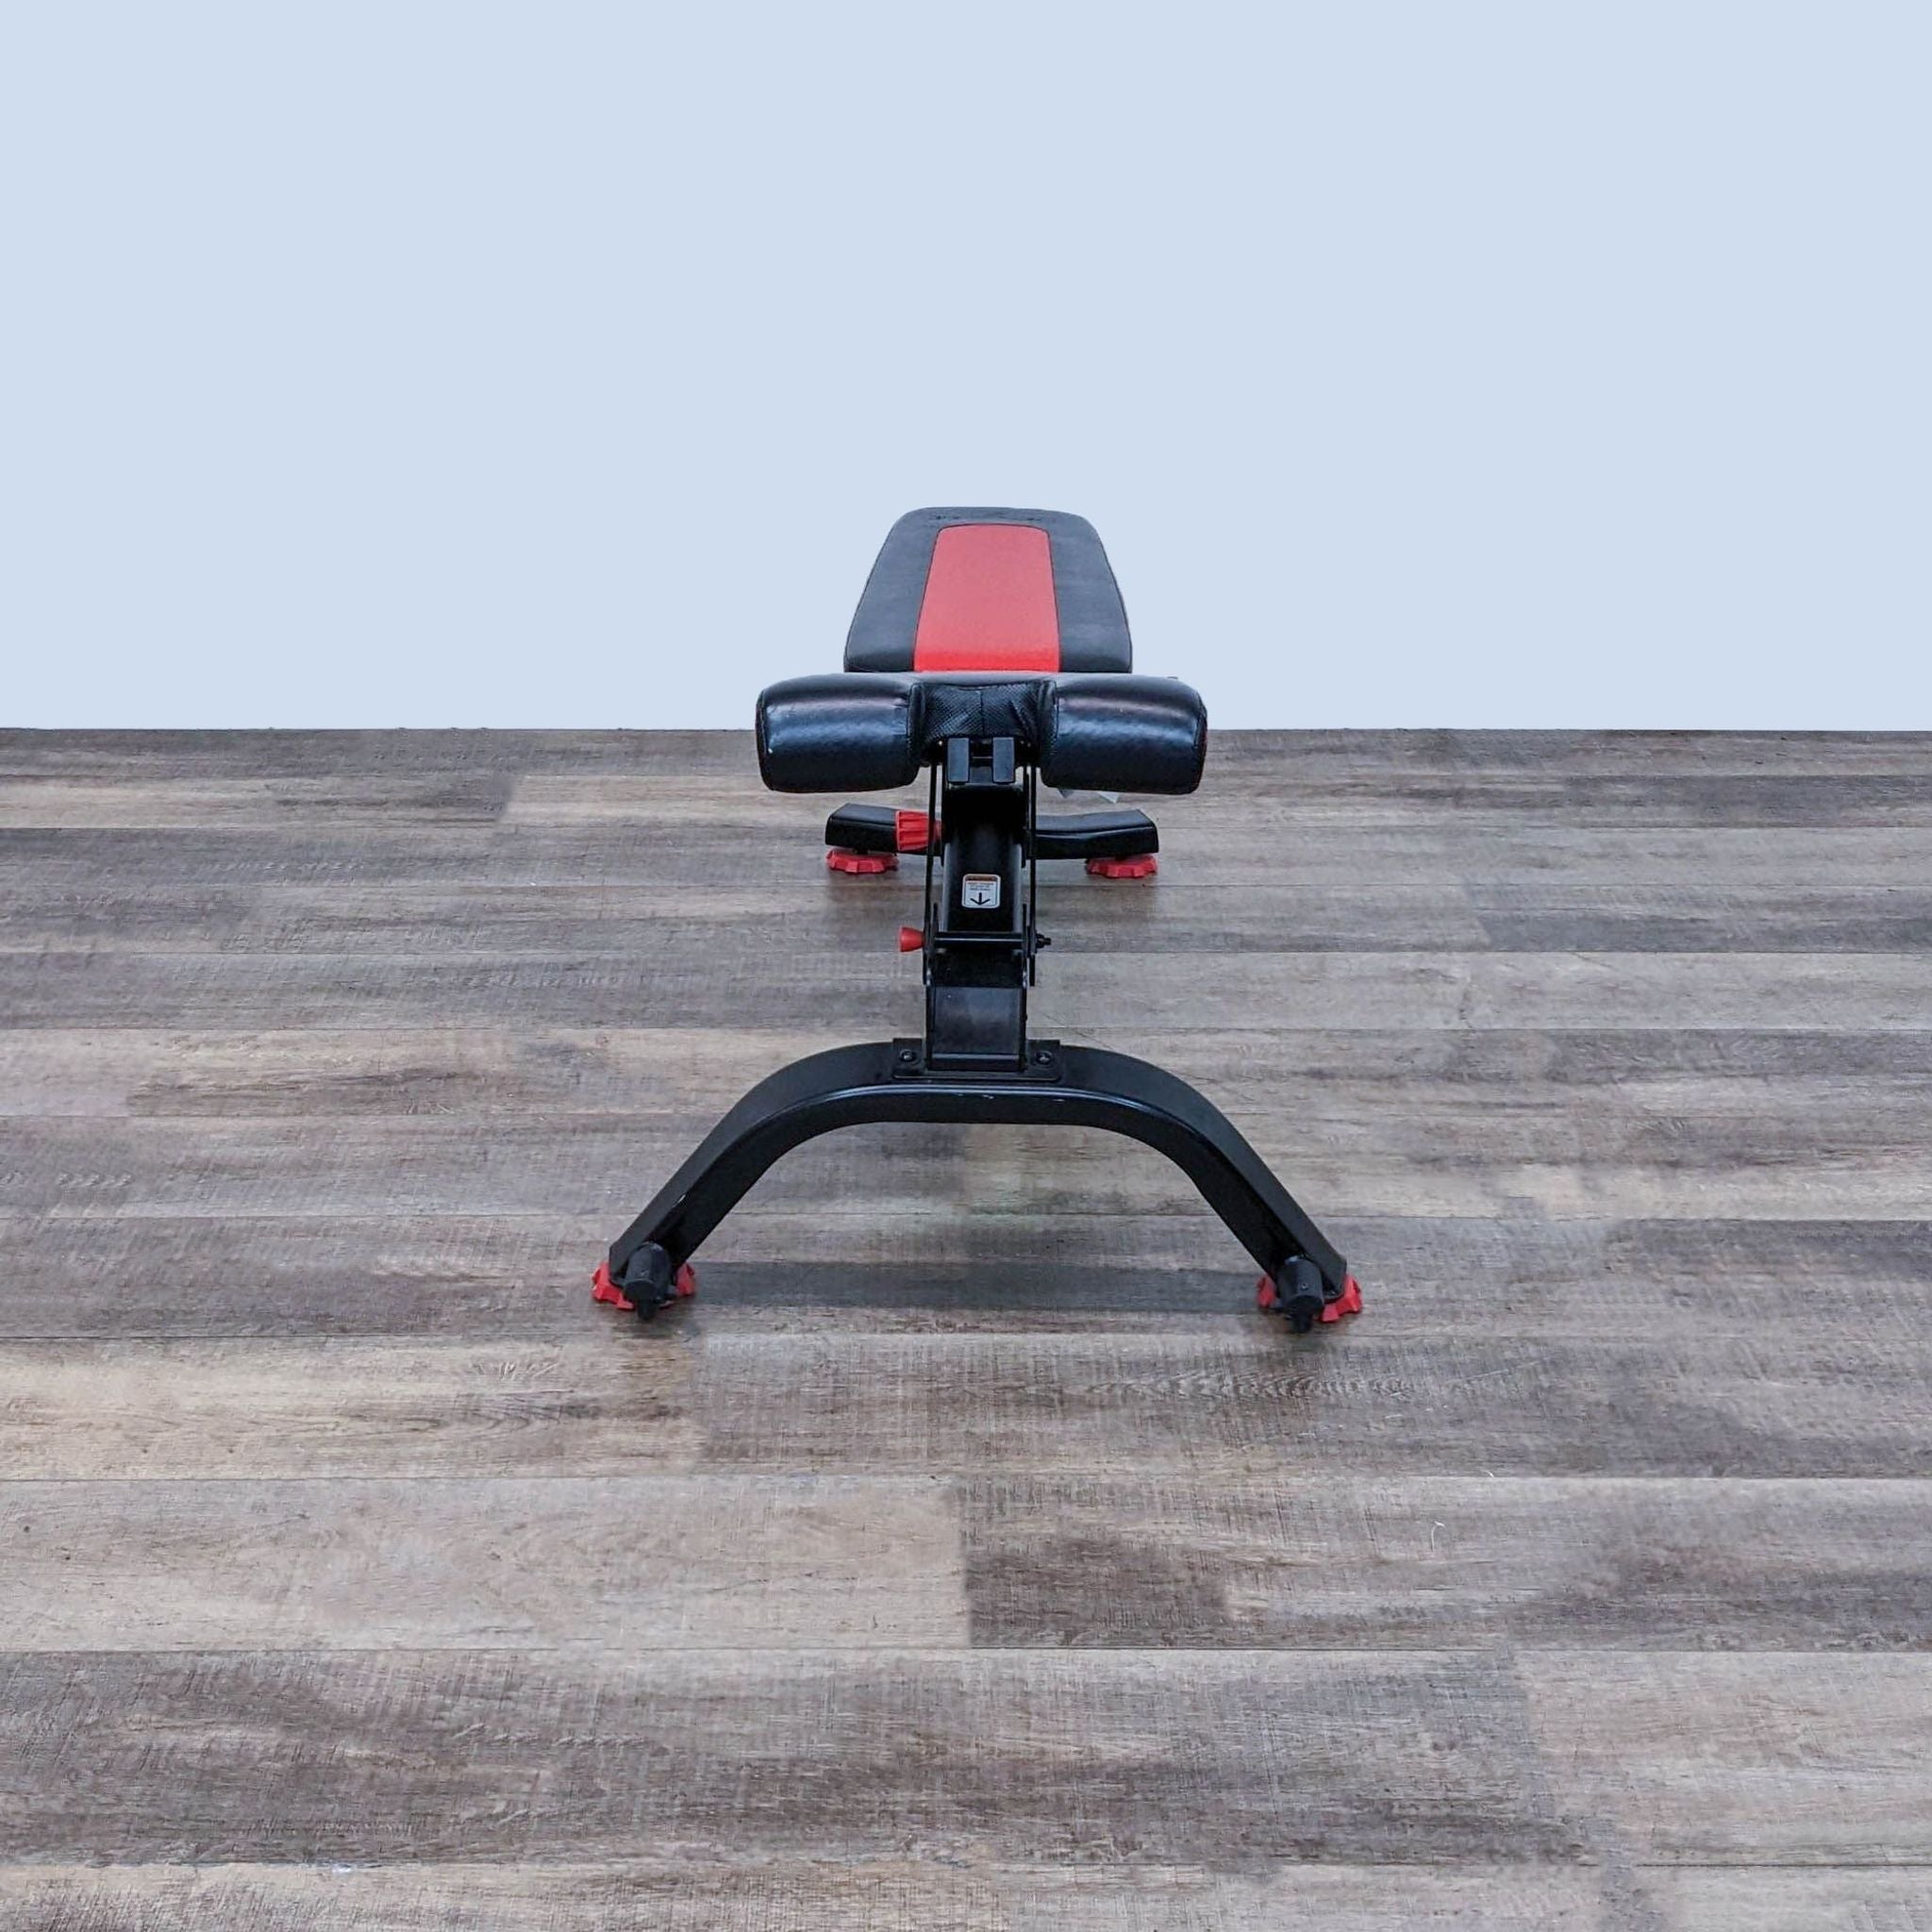 Alt text 2: Adjustable Bowflex gym bench shown at an incline angle, emphasizing its versatility for various exercises.